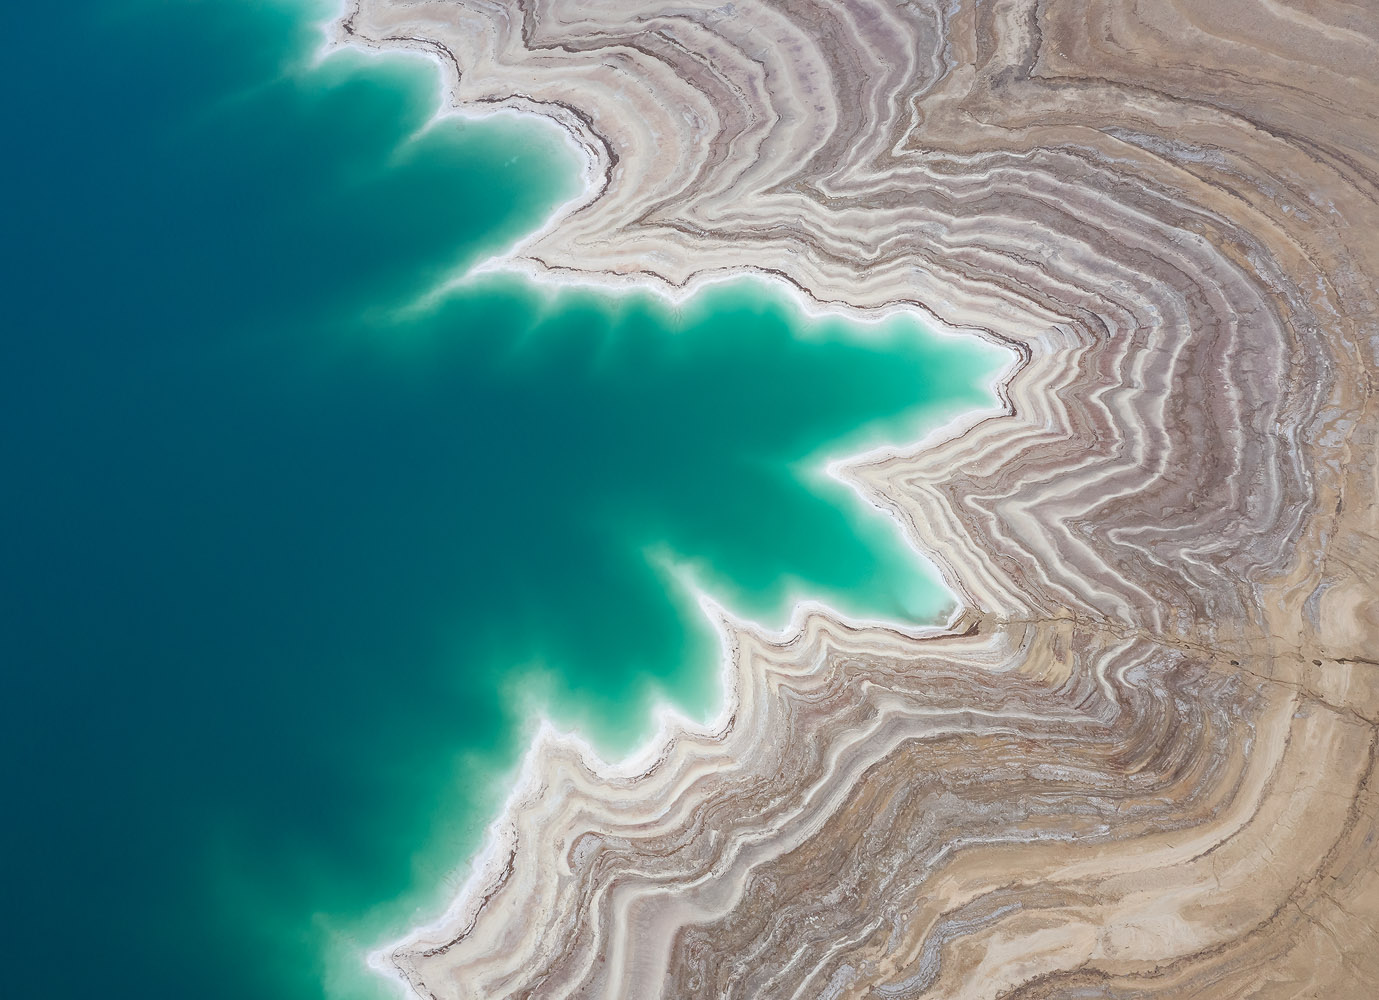 An aerial perspective exposes the beautiful contour and layers of the shore of the Dead Sea.